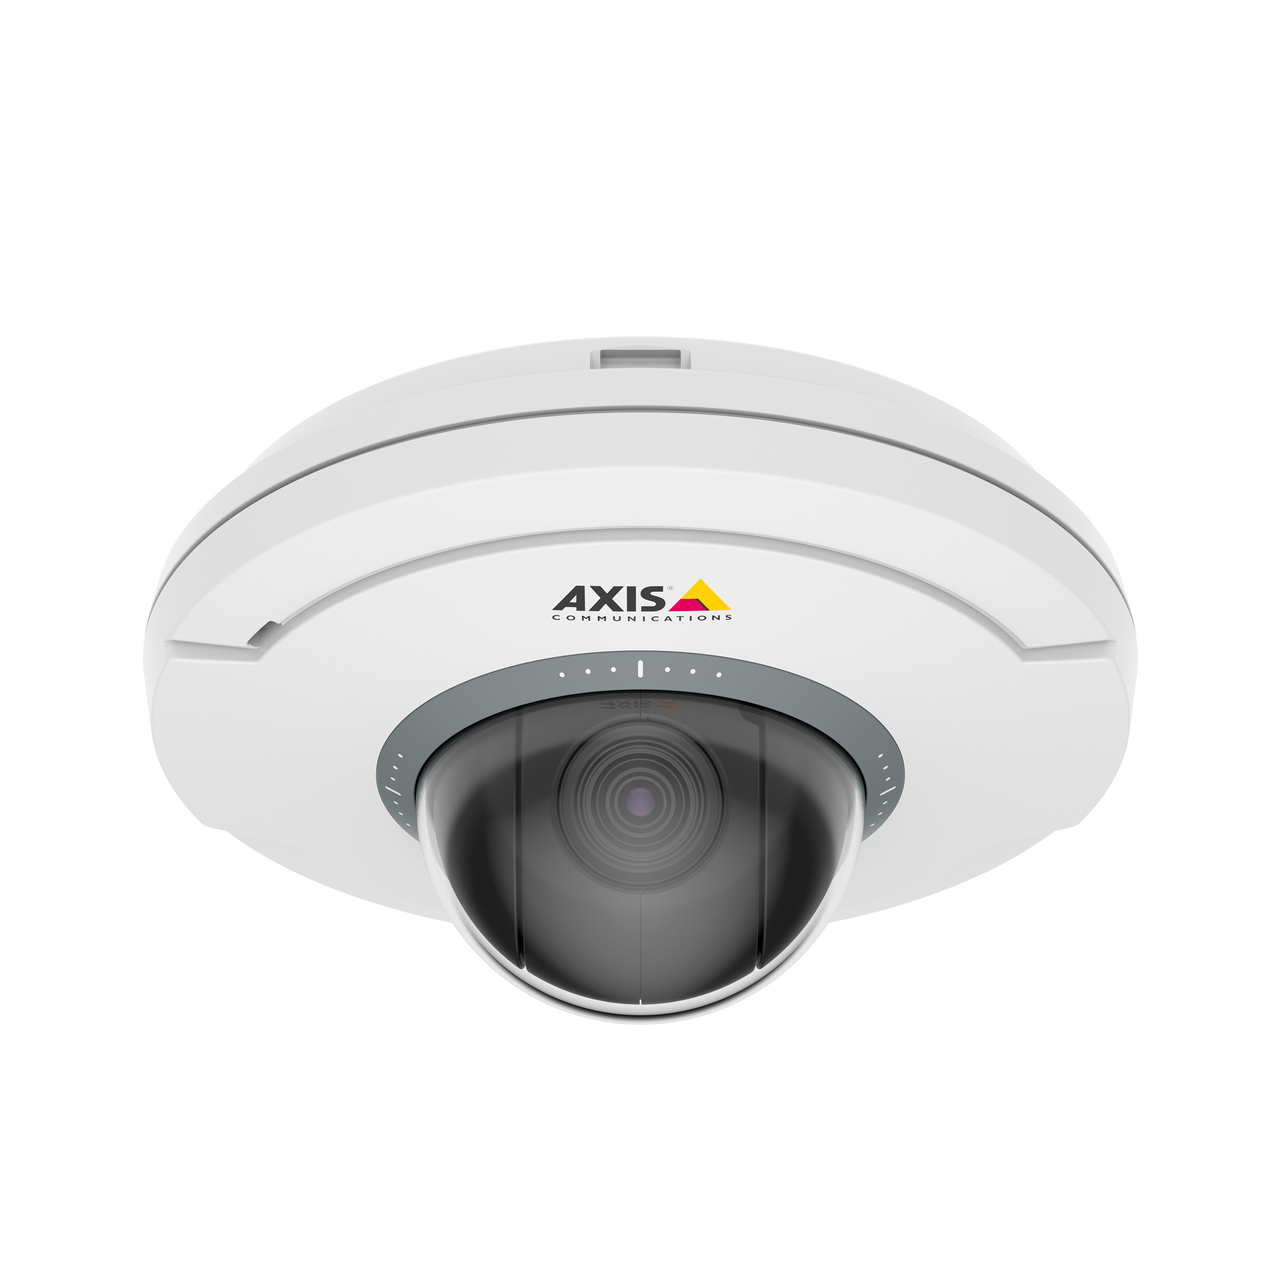 AXIS M5075-G Palm-sized PTZ camera with 5x optical zoom and wireless I/O